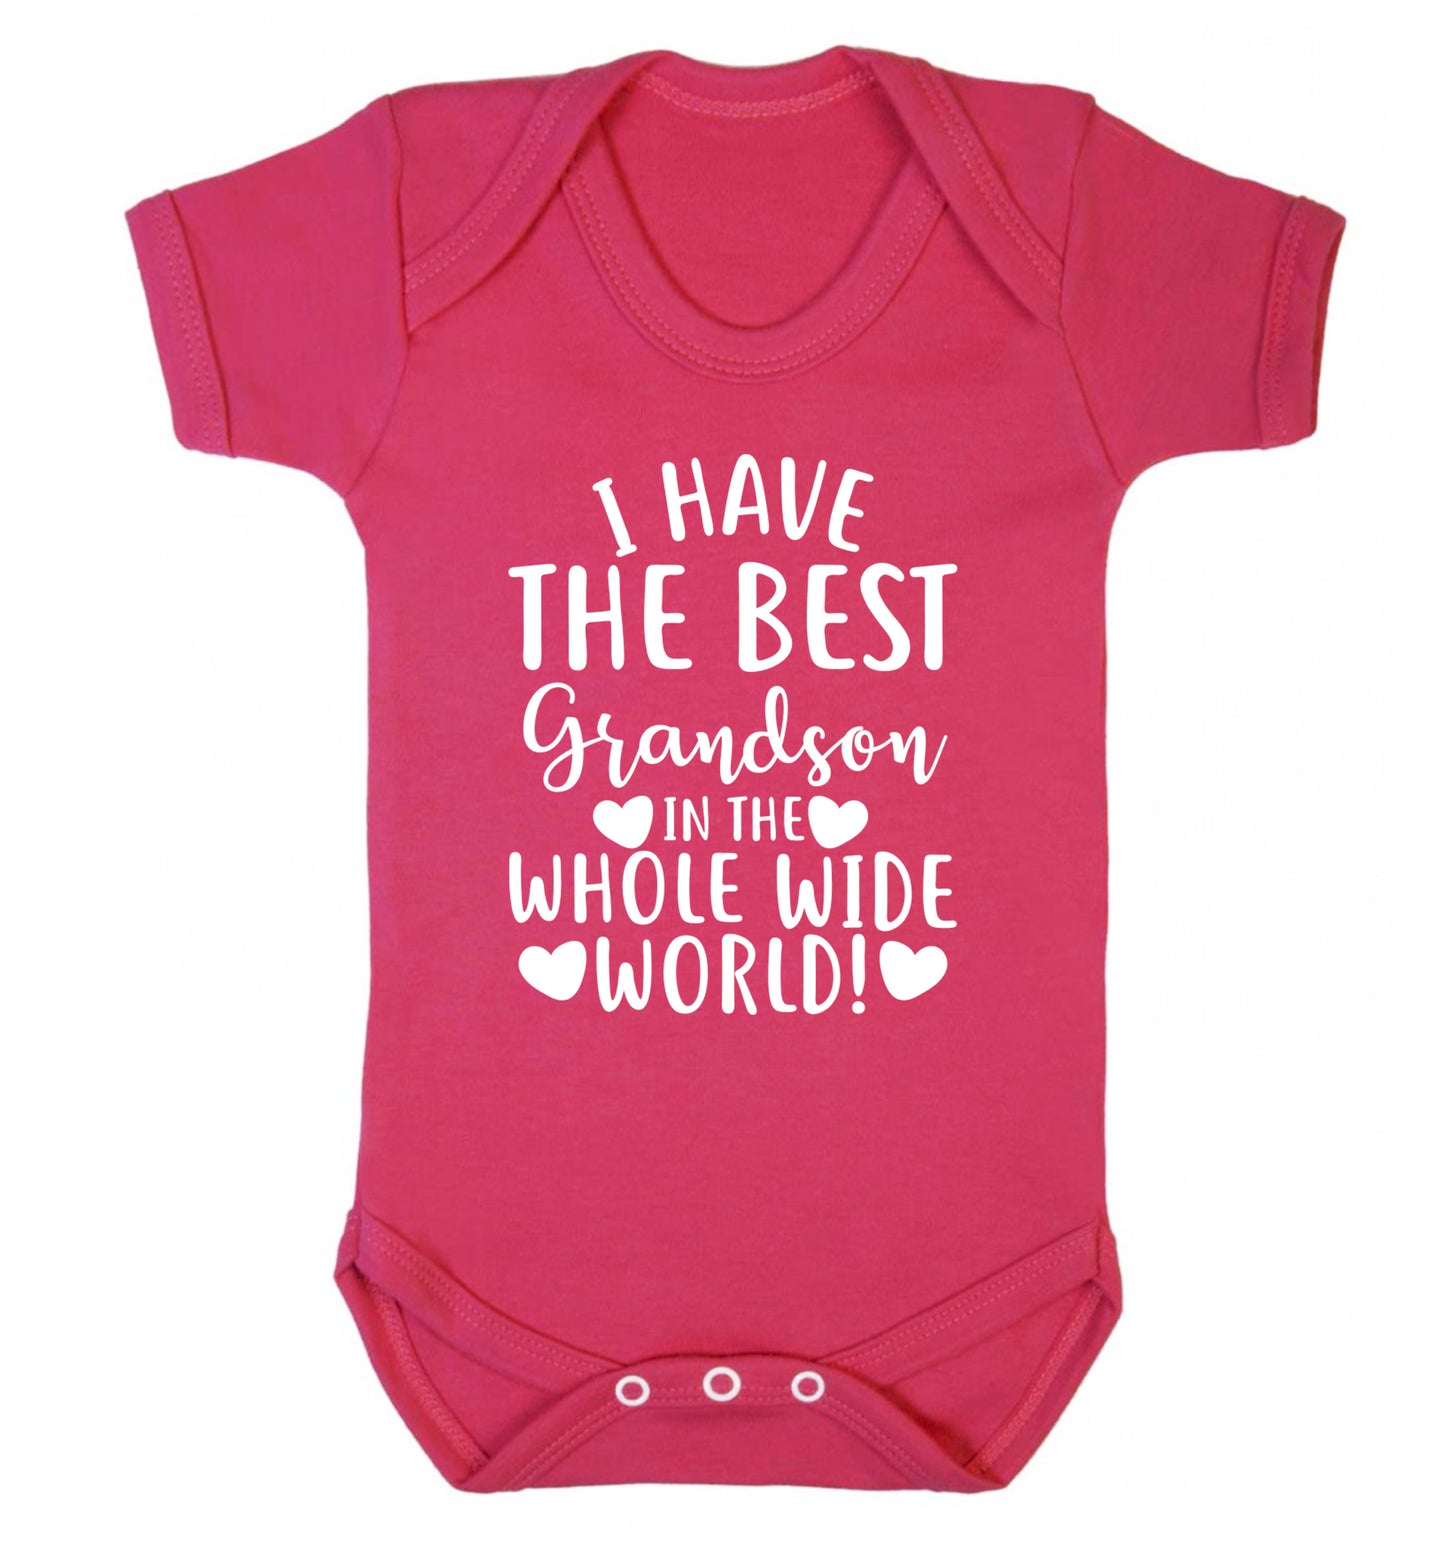 I have the best grandson in the whole wide world! Baby Vest dark pink 18-24 months